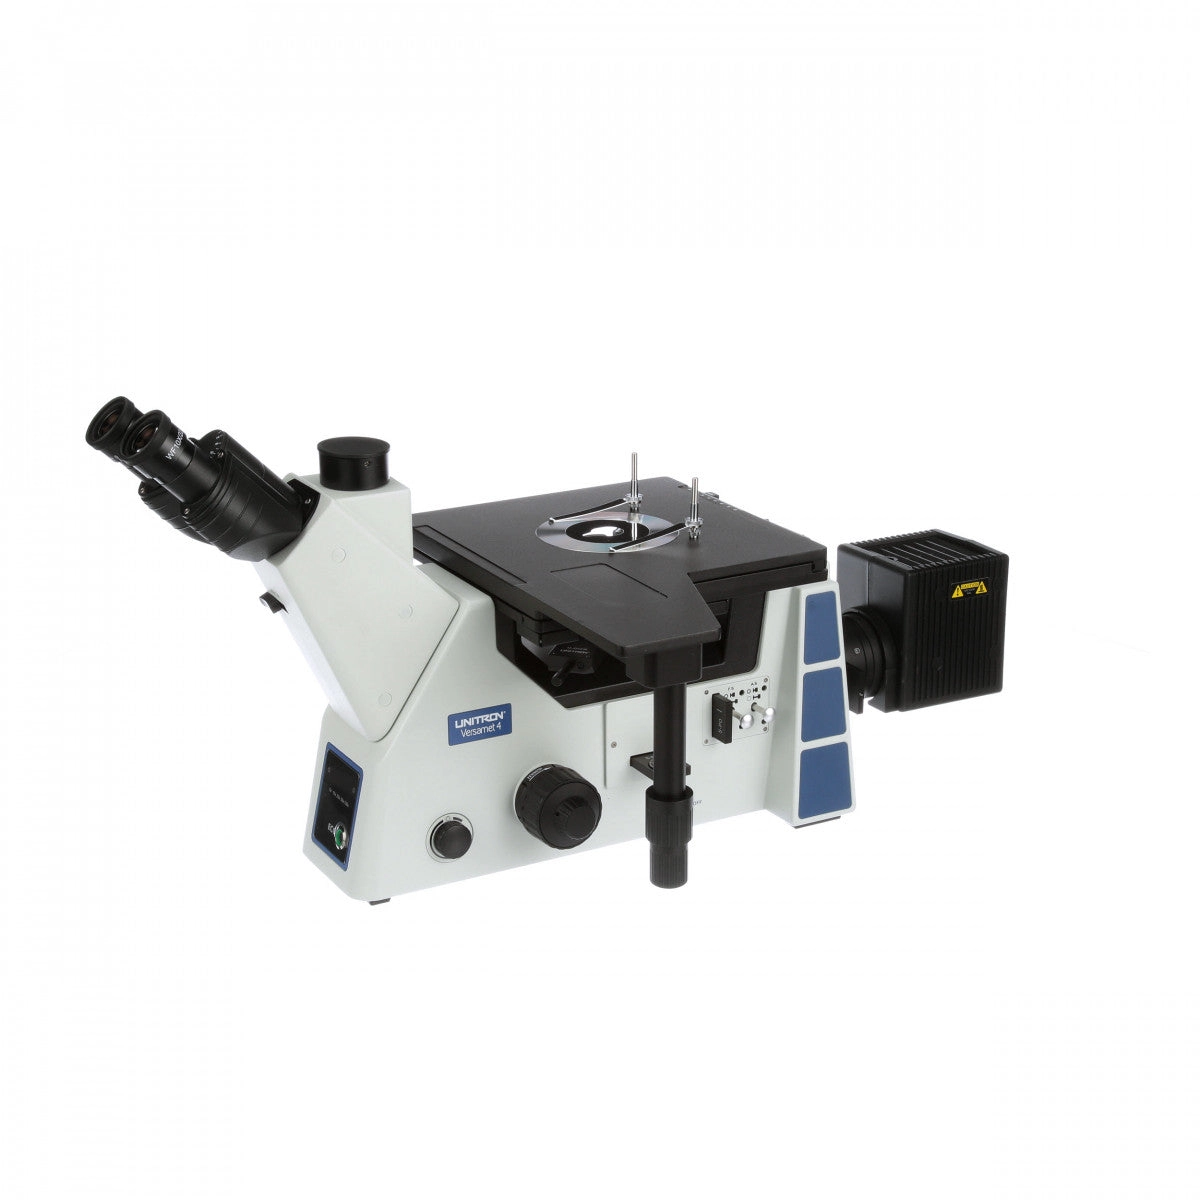 Unitron Versamet 4 Inverted Metallurgical Microscope - With BF Objectives